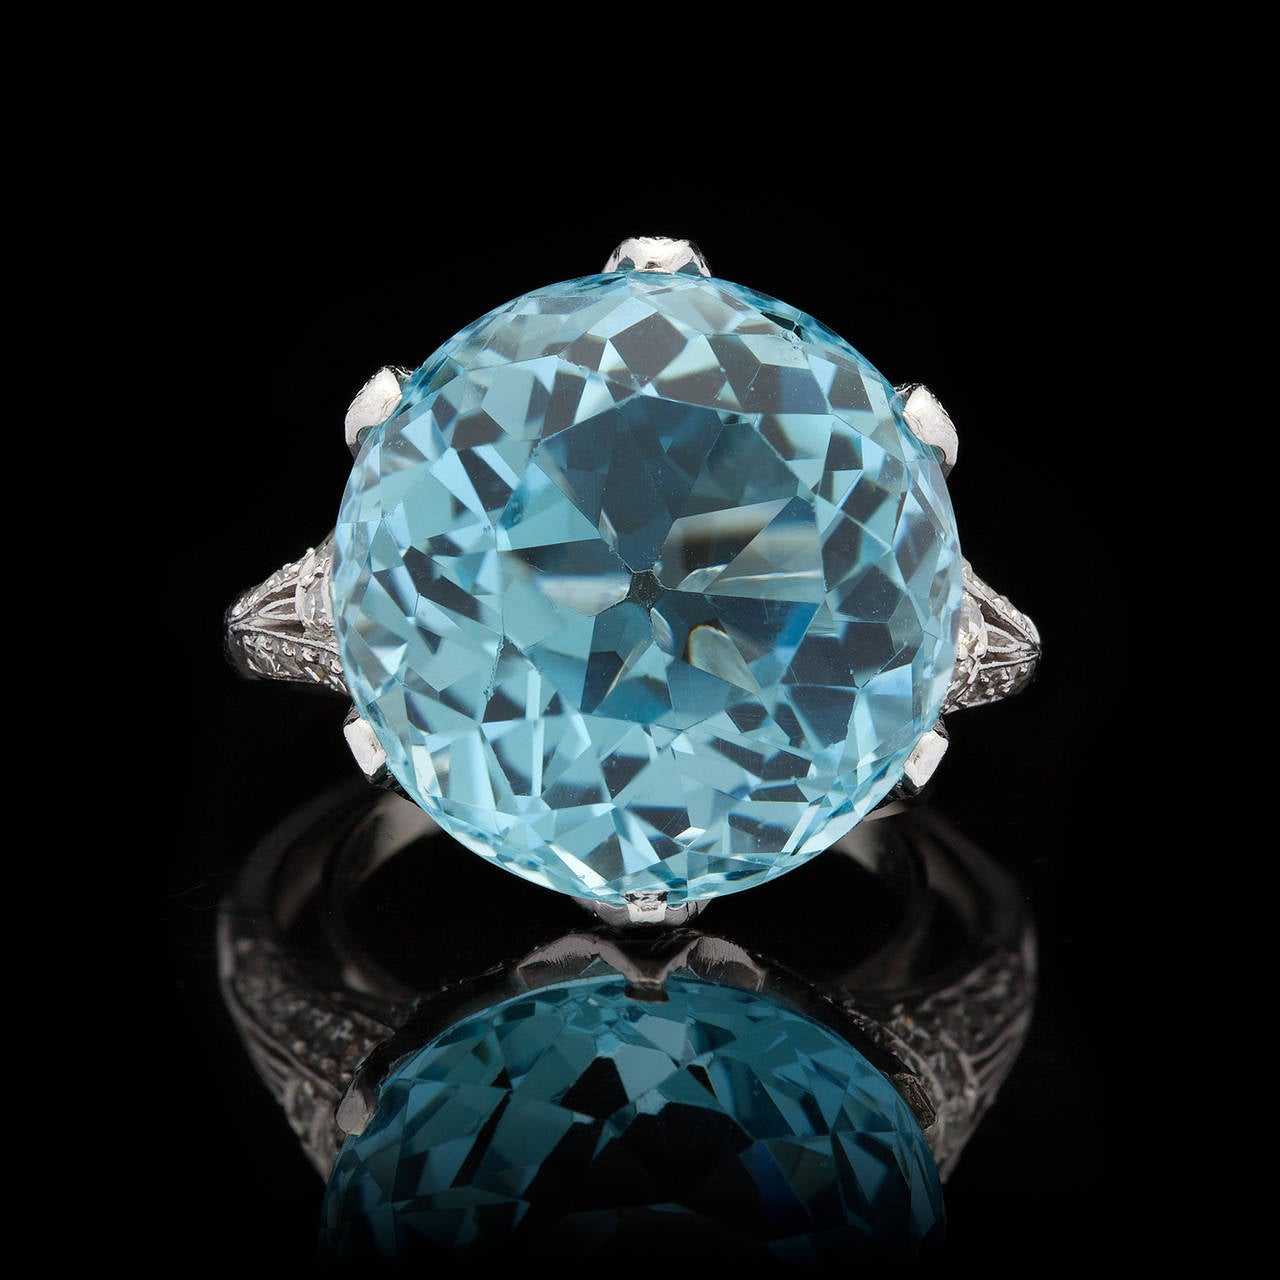 Ring Features One 12.00ct Round Cut Aquamarine Set in a 14Kt White Gold Woven Back Mounting Adorned with 70 Round Cut Diamonds, with a total approximate diamond weight of 1.10cts. The ring is a size 7.75 and weighs 9.5 grams.